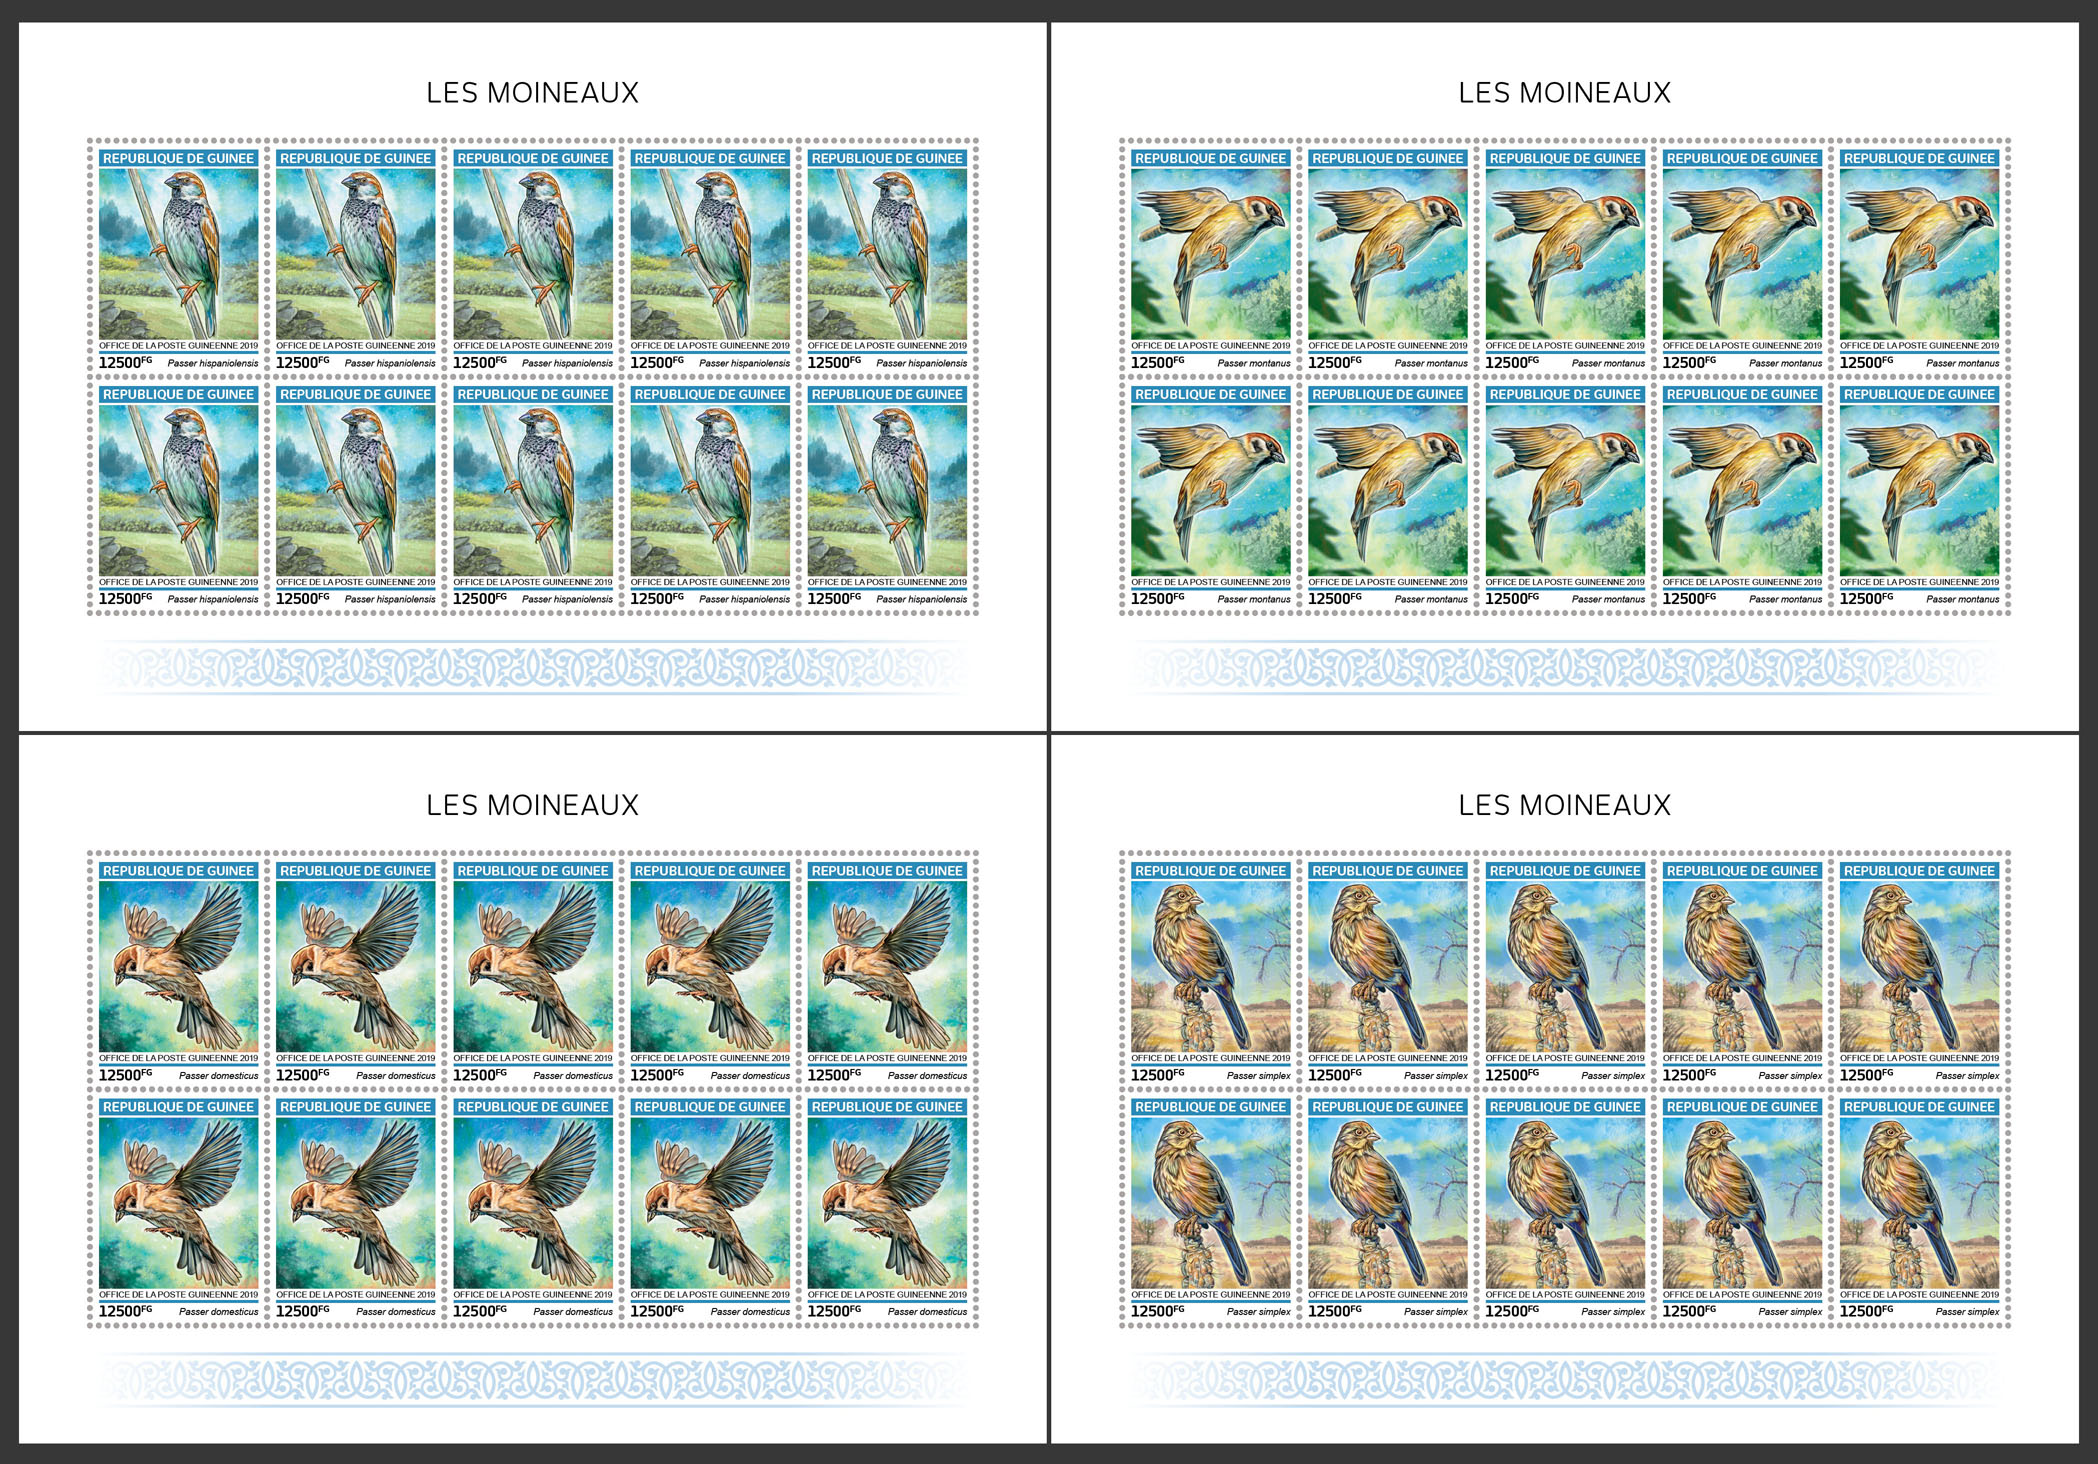 Sparrows - Issue of Guinée postage stamps